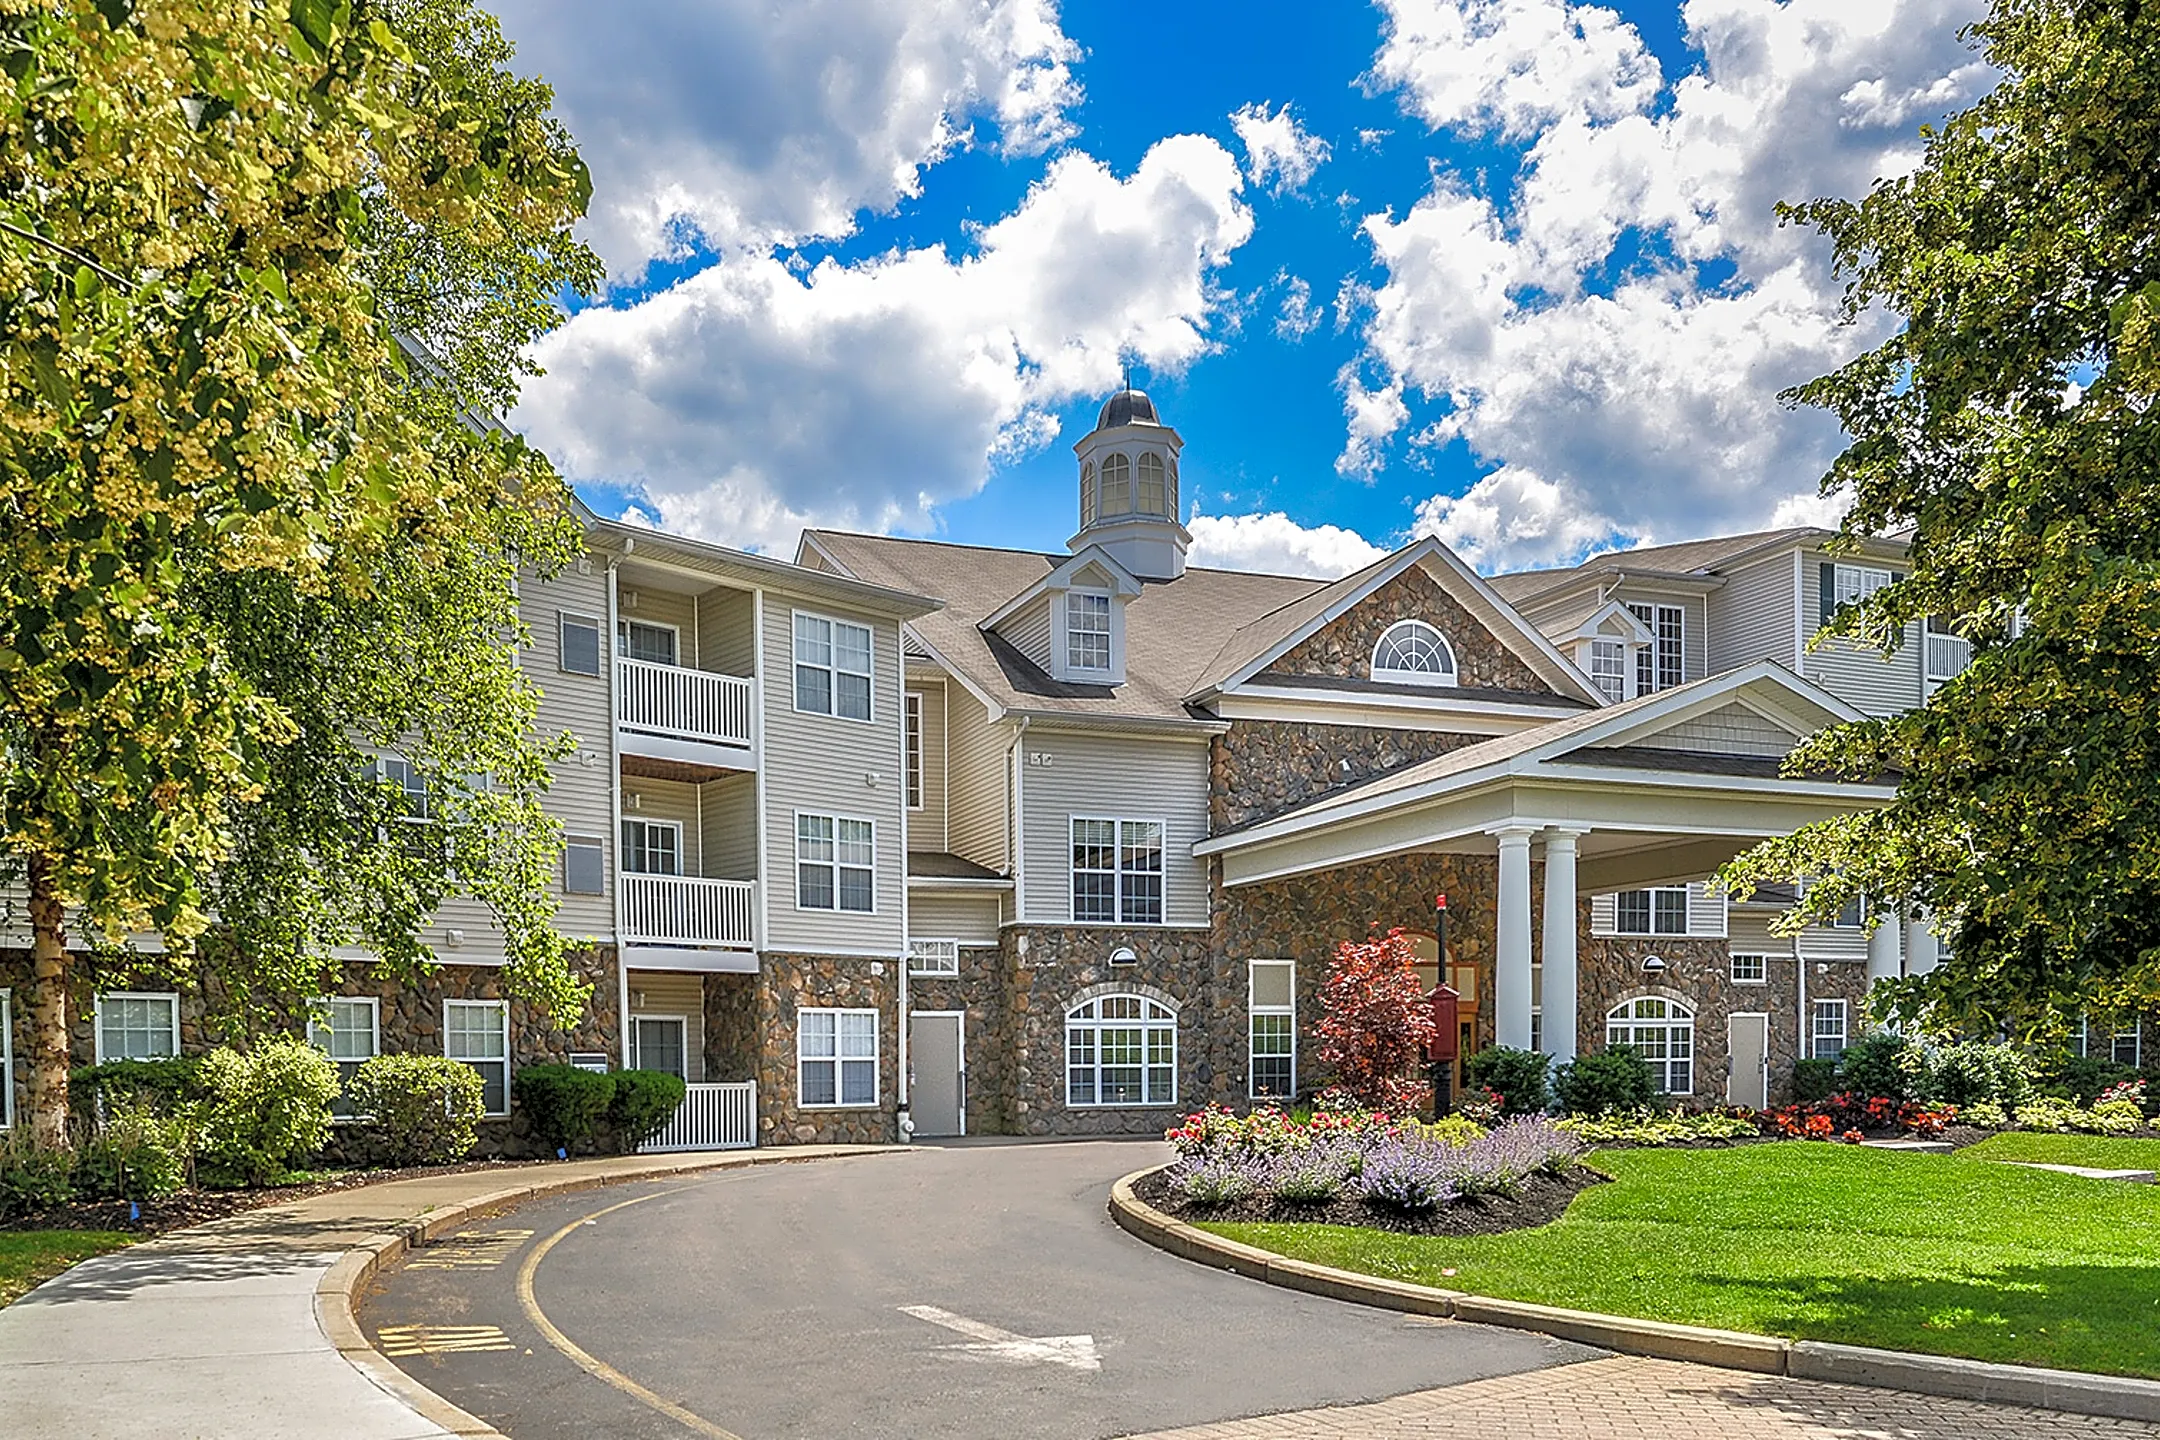 Building - Highlands at Faxon Woods - Quincy, MA